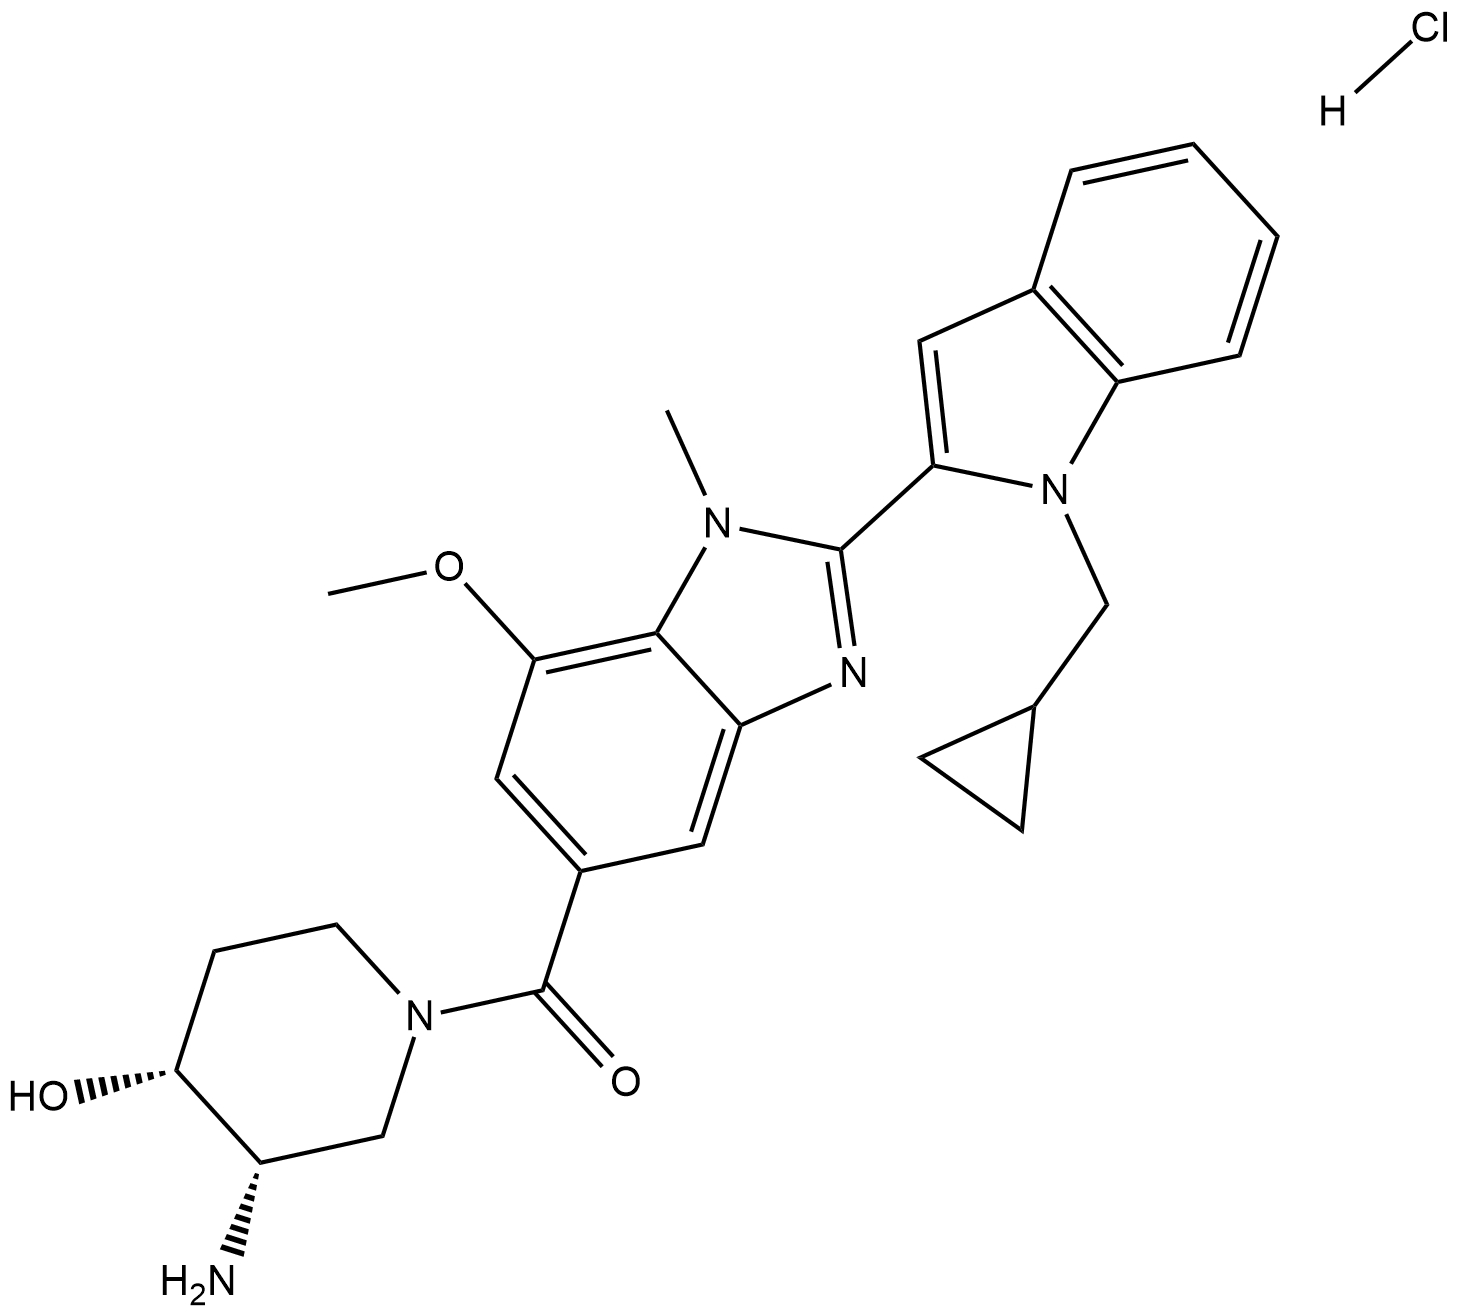 GSK484 hydrochloride  Chemical Structure